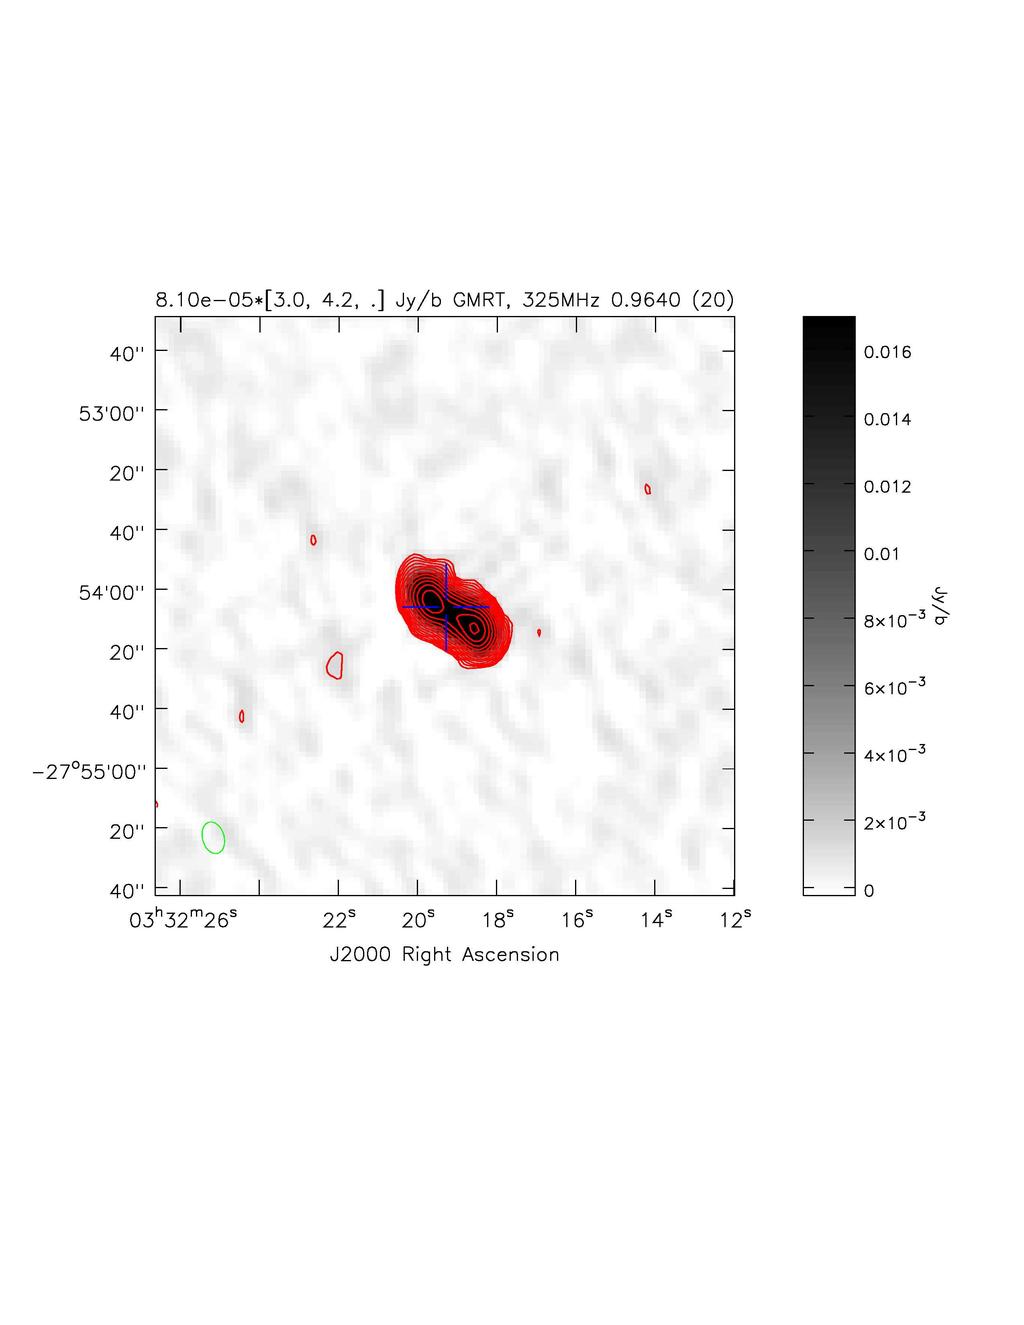 Figure 4: Our GMRT -MHz images are shown along with the VLA 1400-MHz images which have been plotted from the image of Miller et al.